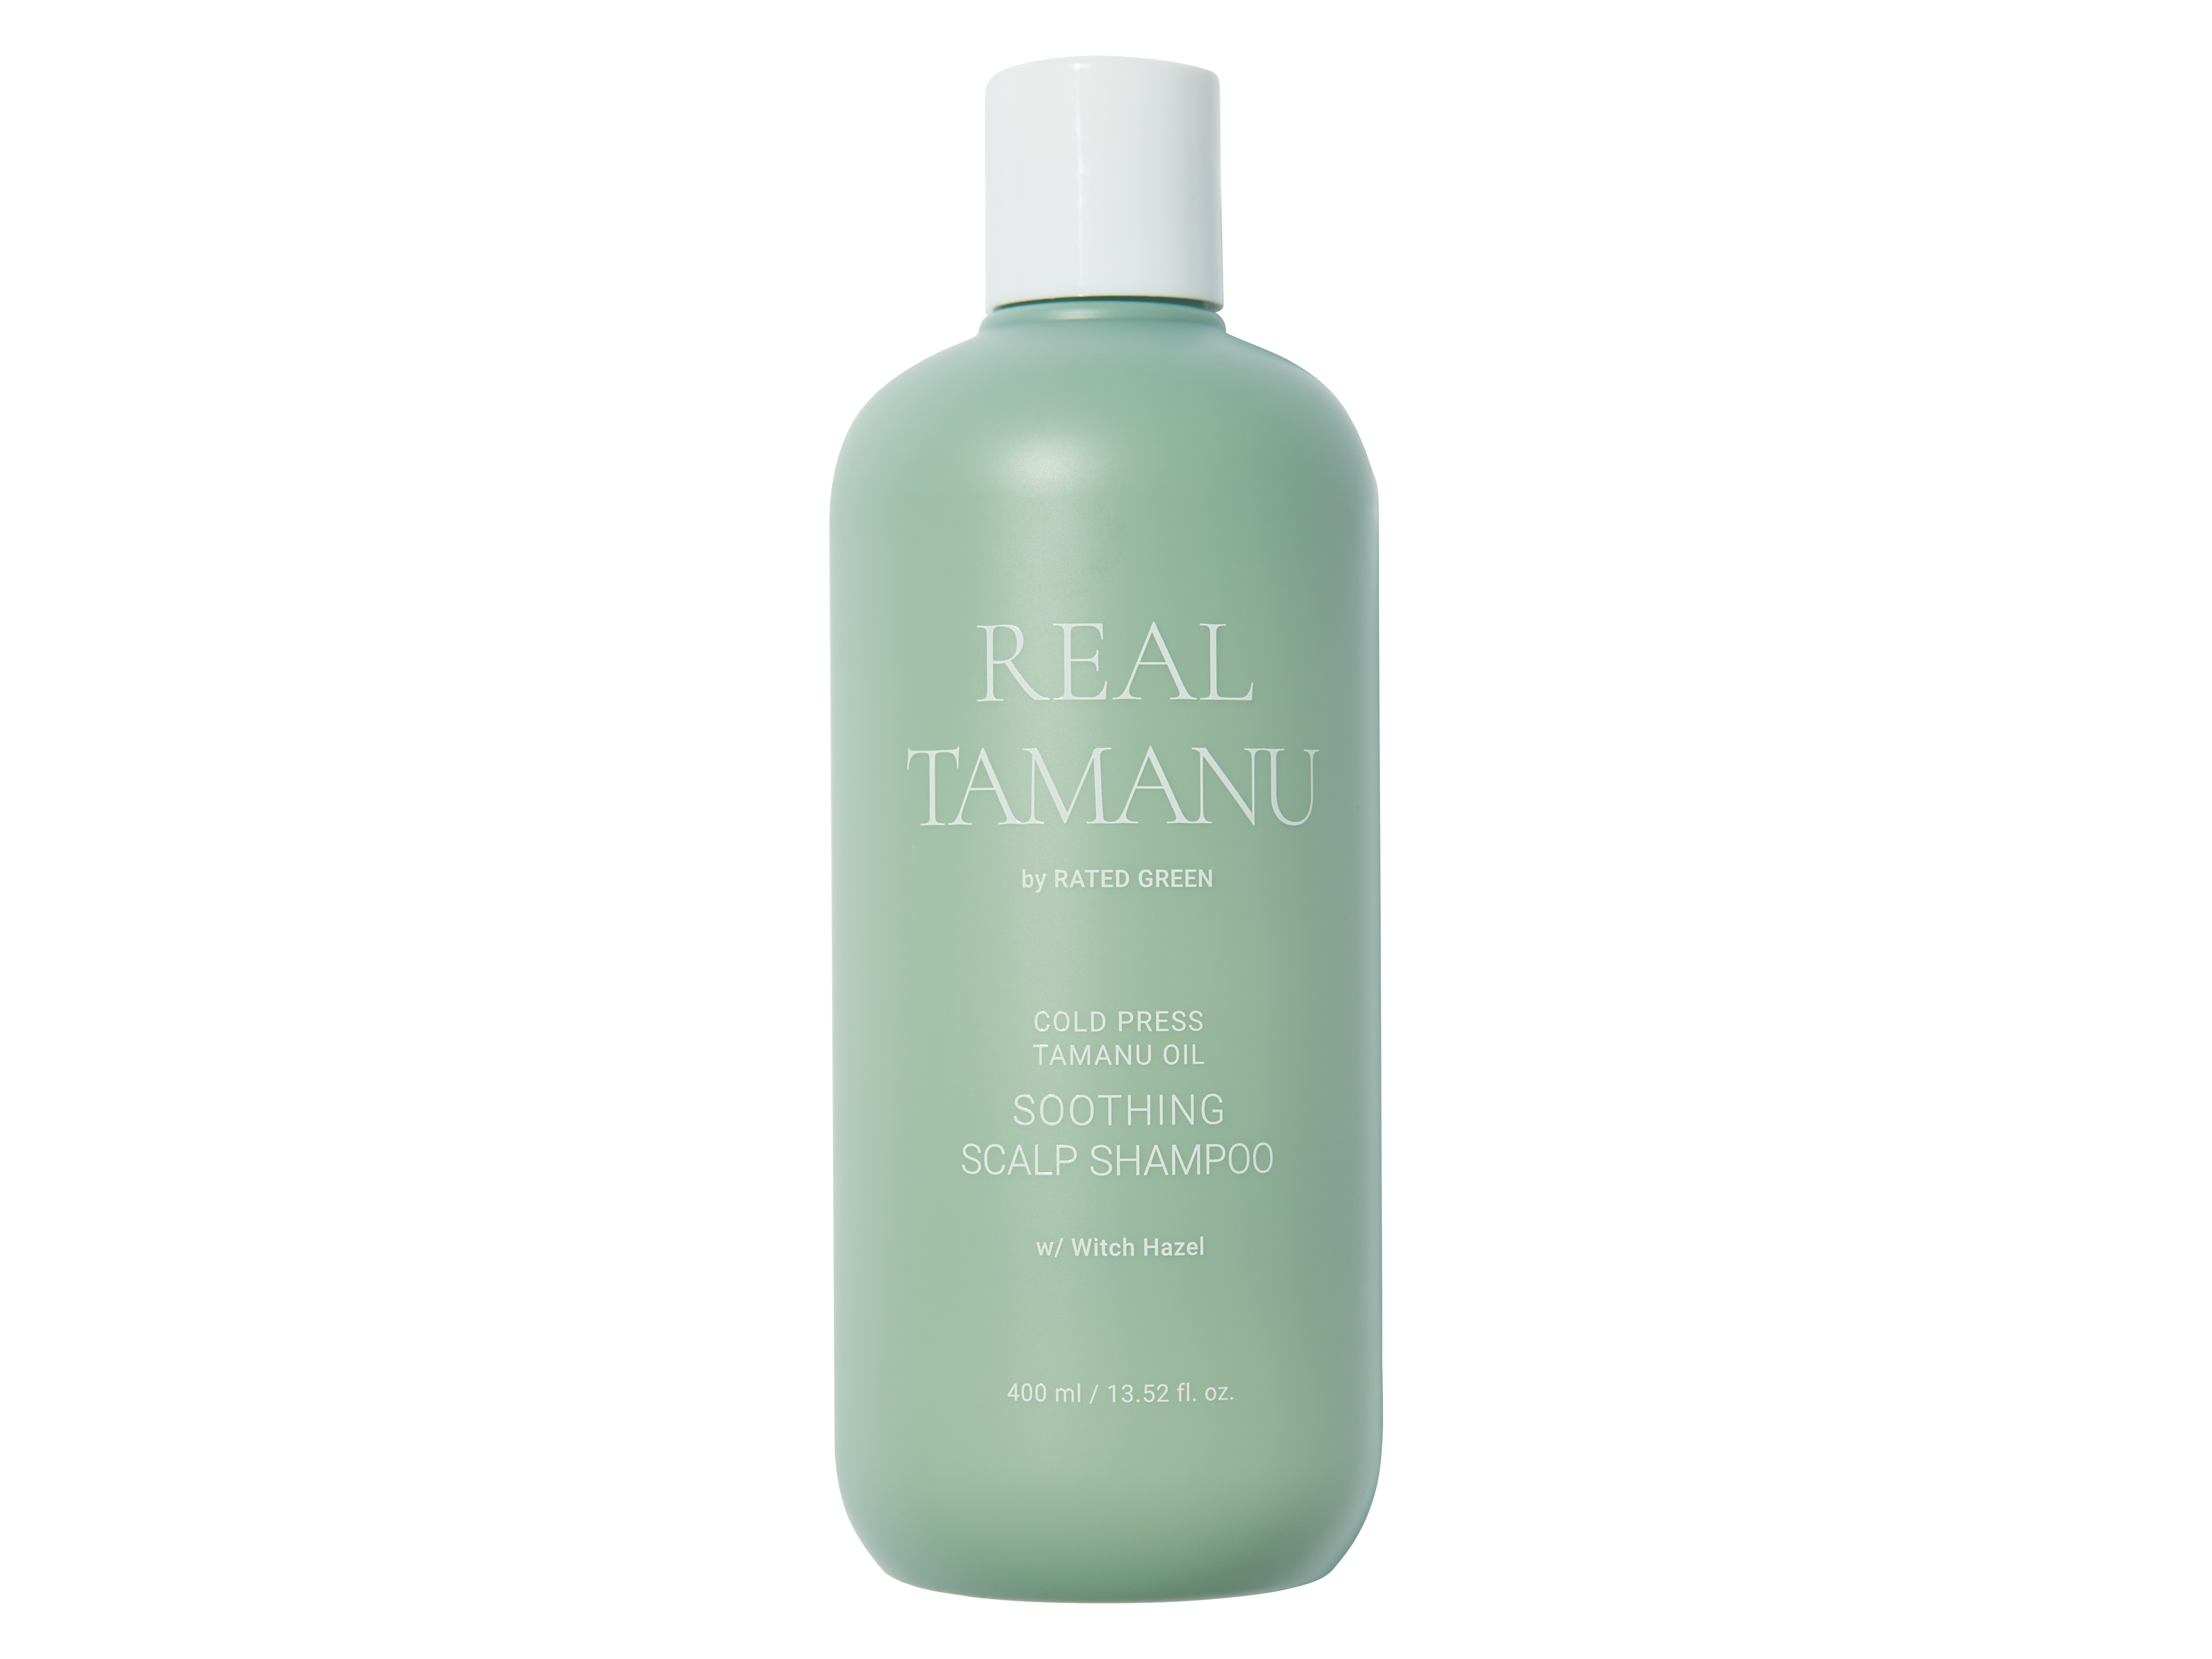 Cold Pressed Tamanu Oil Soothing Scalp Shampoo, 400 ml